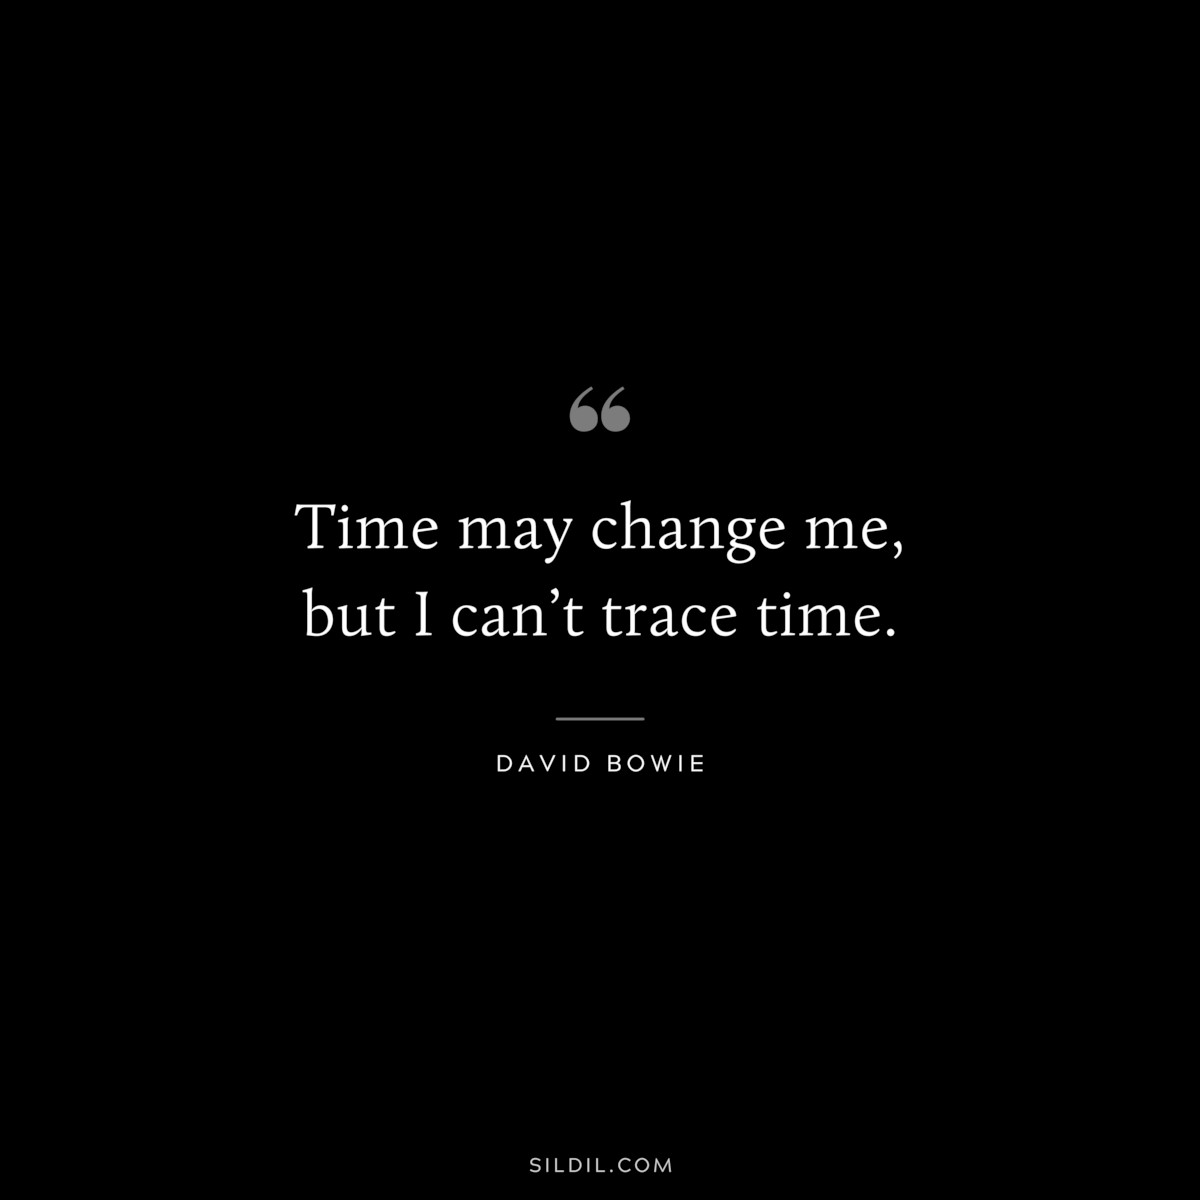 Time may change me, but I can’t trace time. ― David Bowie